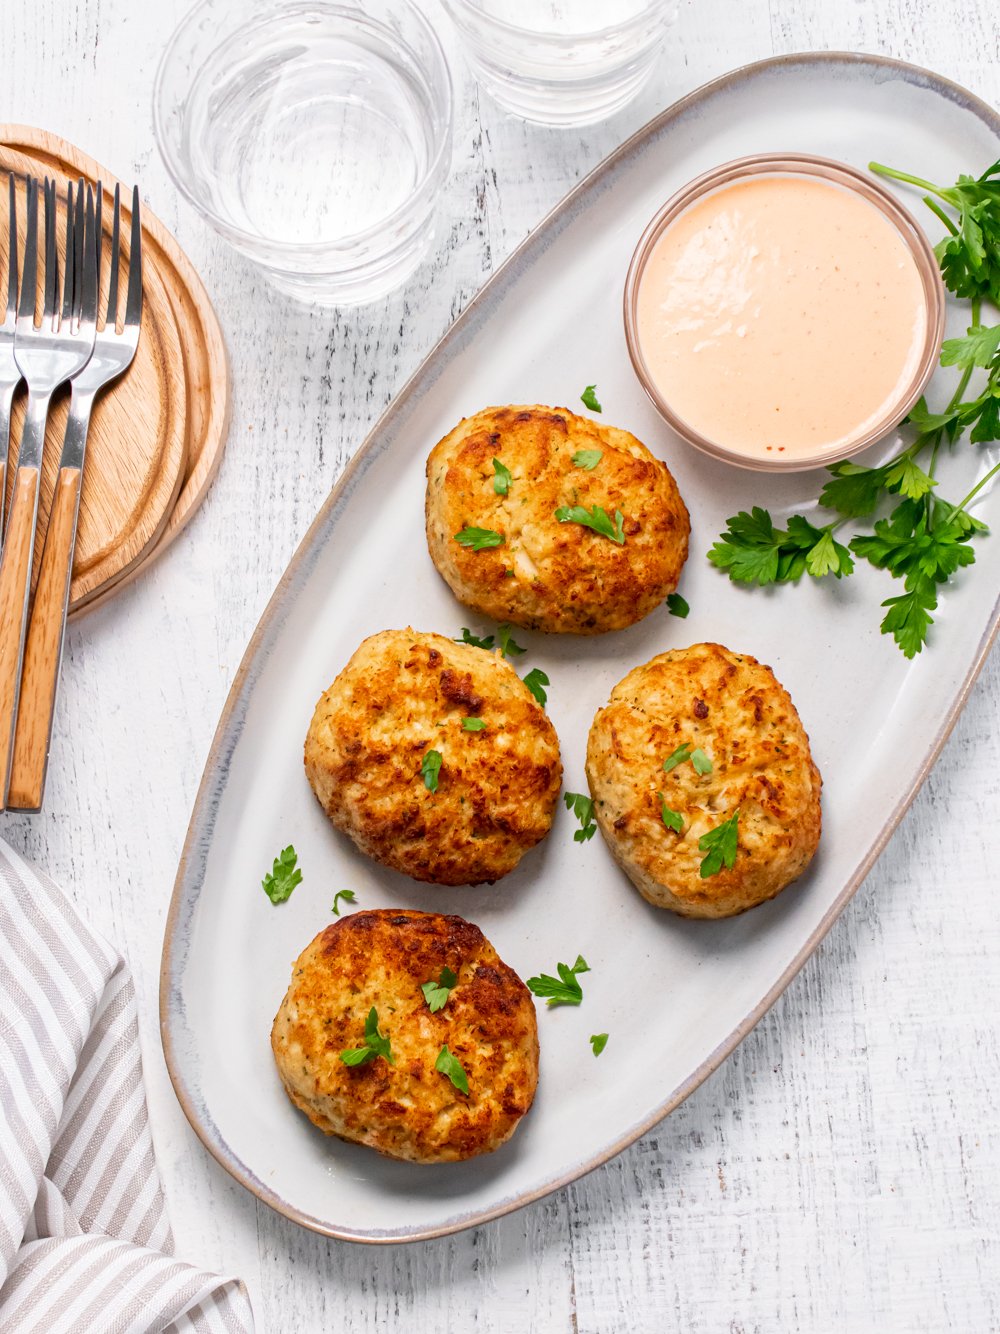 Maryland Crab Cakes with Little Filler | Life's Ambrosia